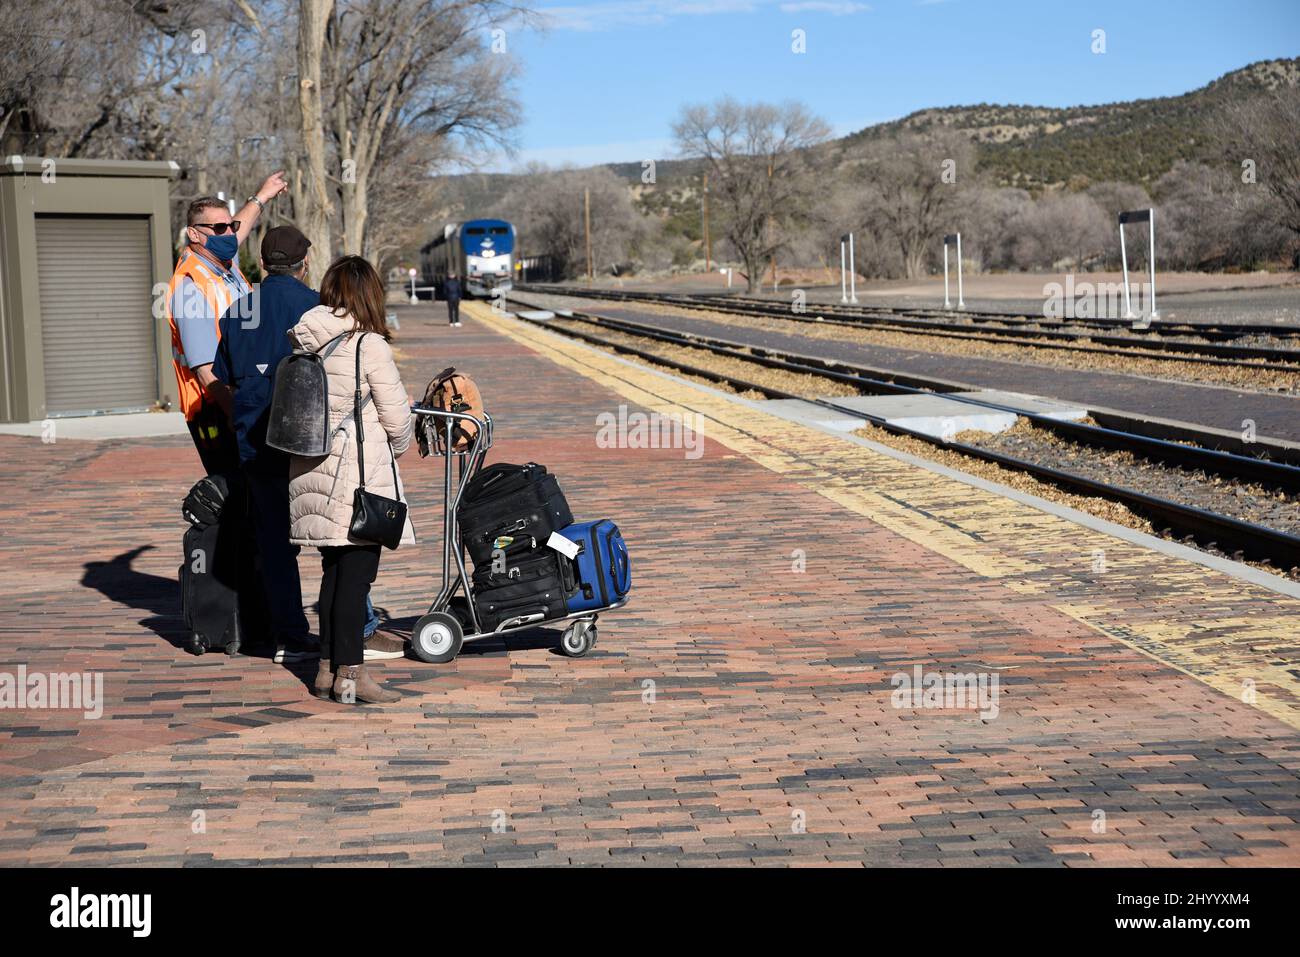 An Amtrak Southwest Chief passenger train arrives at the Amtrak station in Lamy, New Mexico, to pick up passengers headed west to Los Angeles. Stock Photo